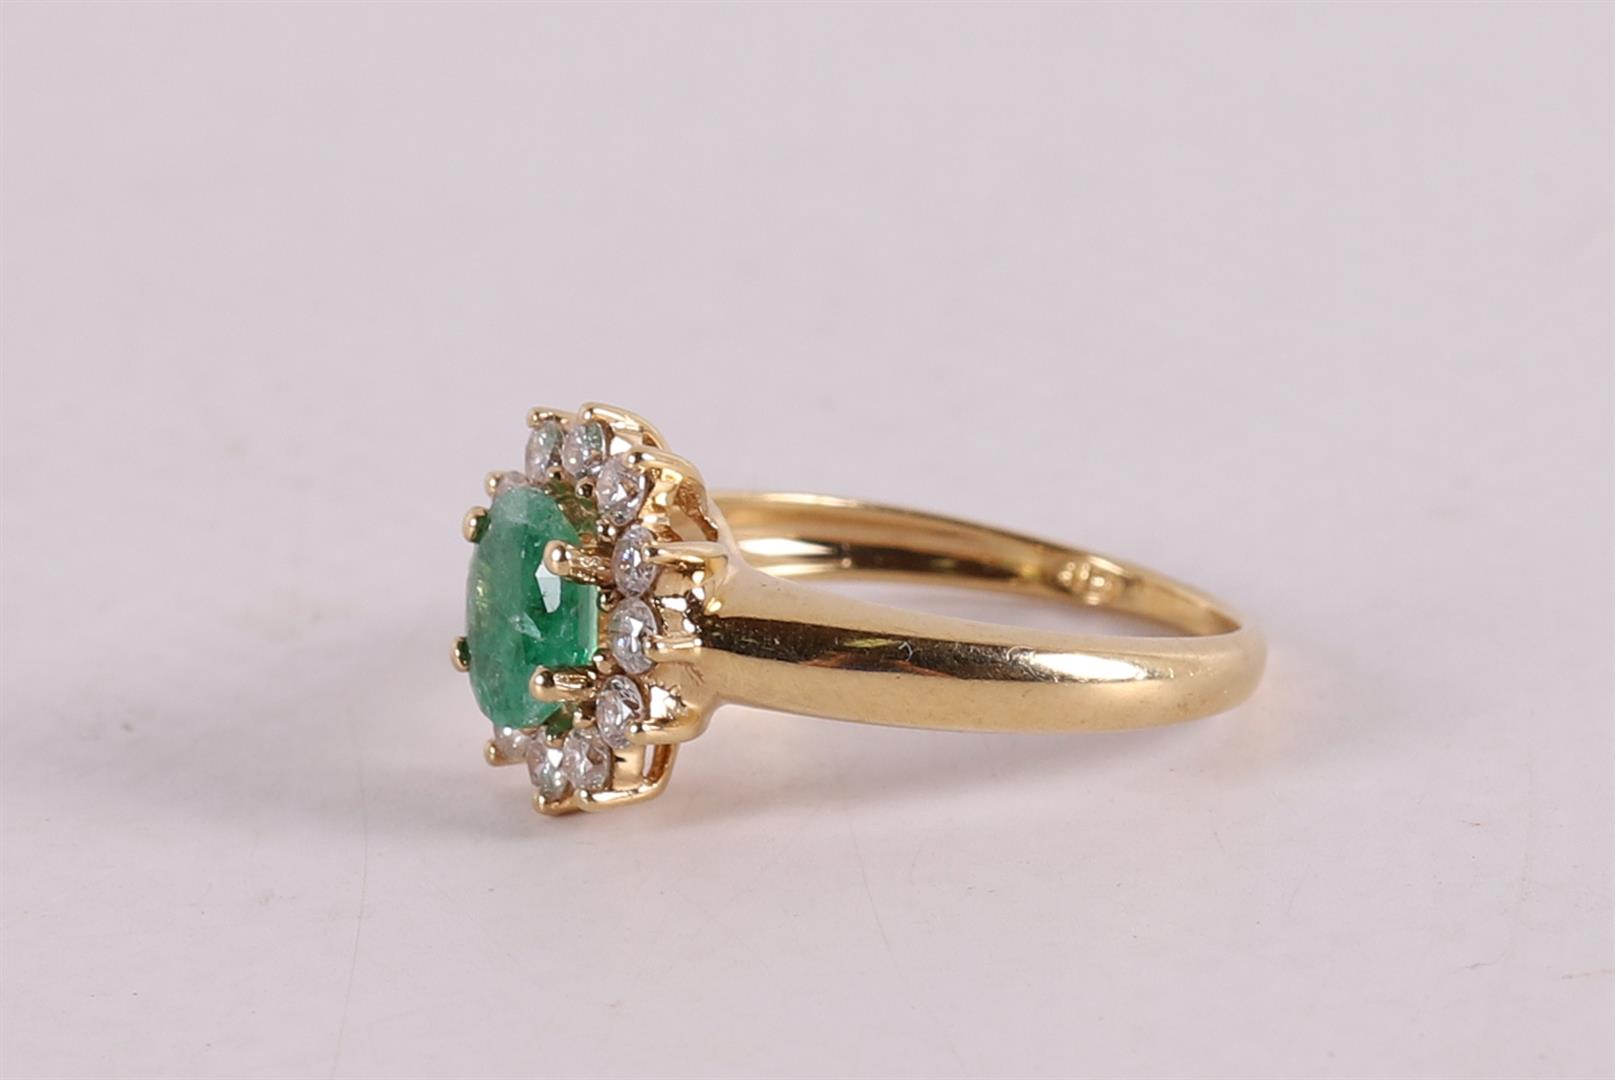 An 18 kt gold ring with an oval facet cut emerald. - Image 2 of 2